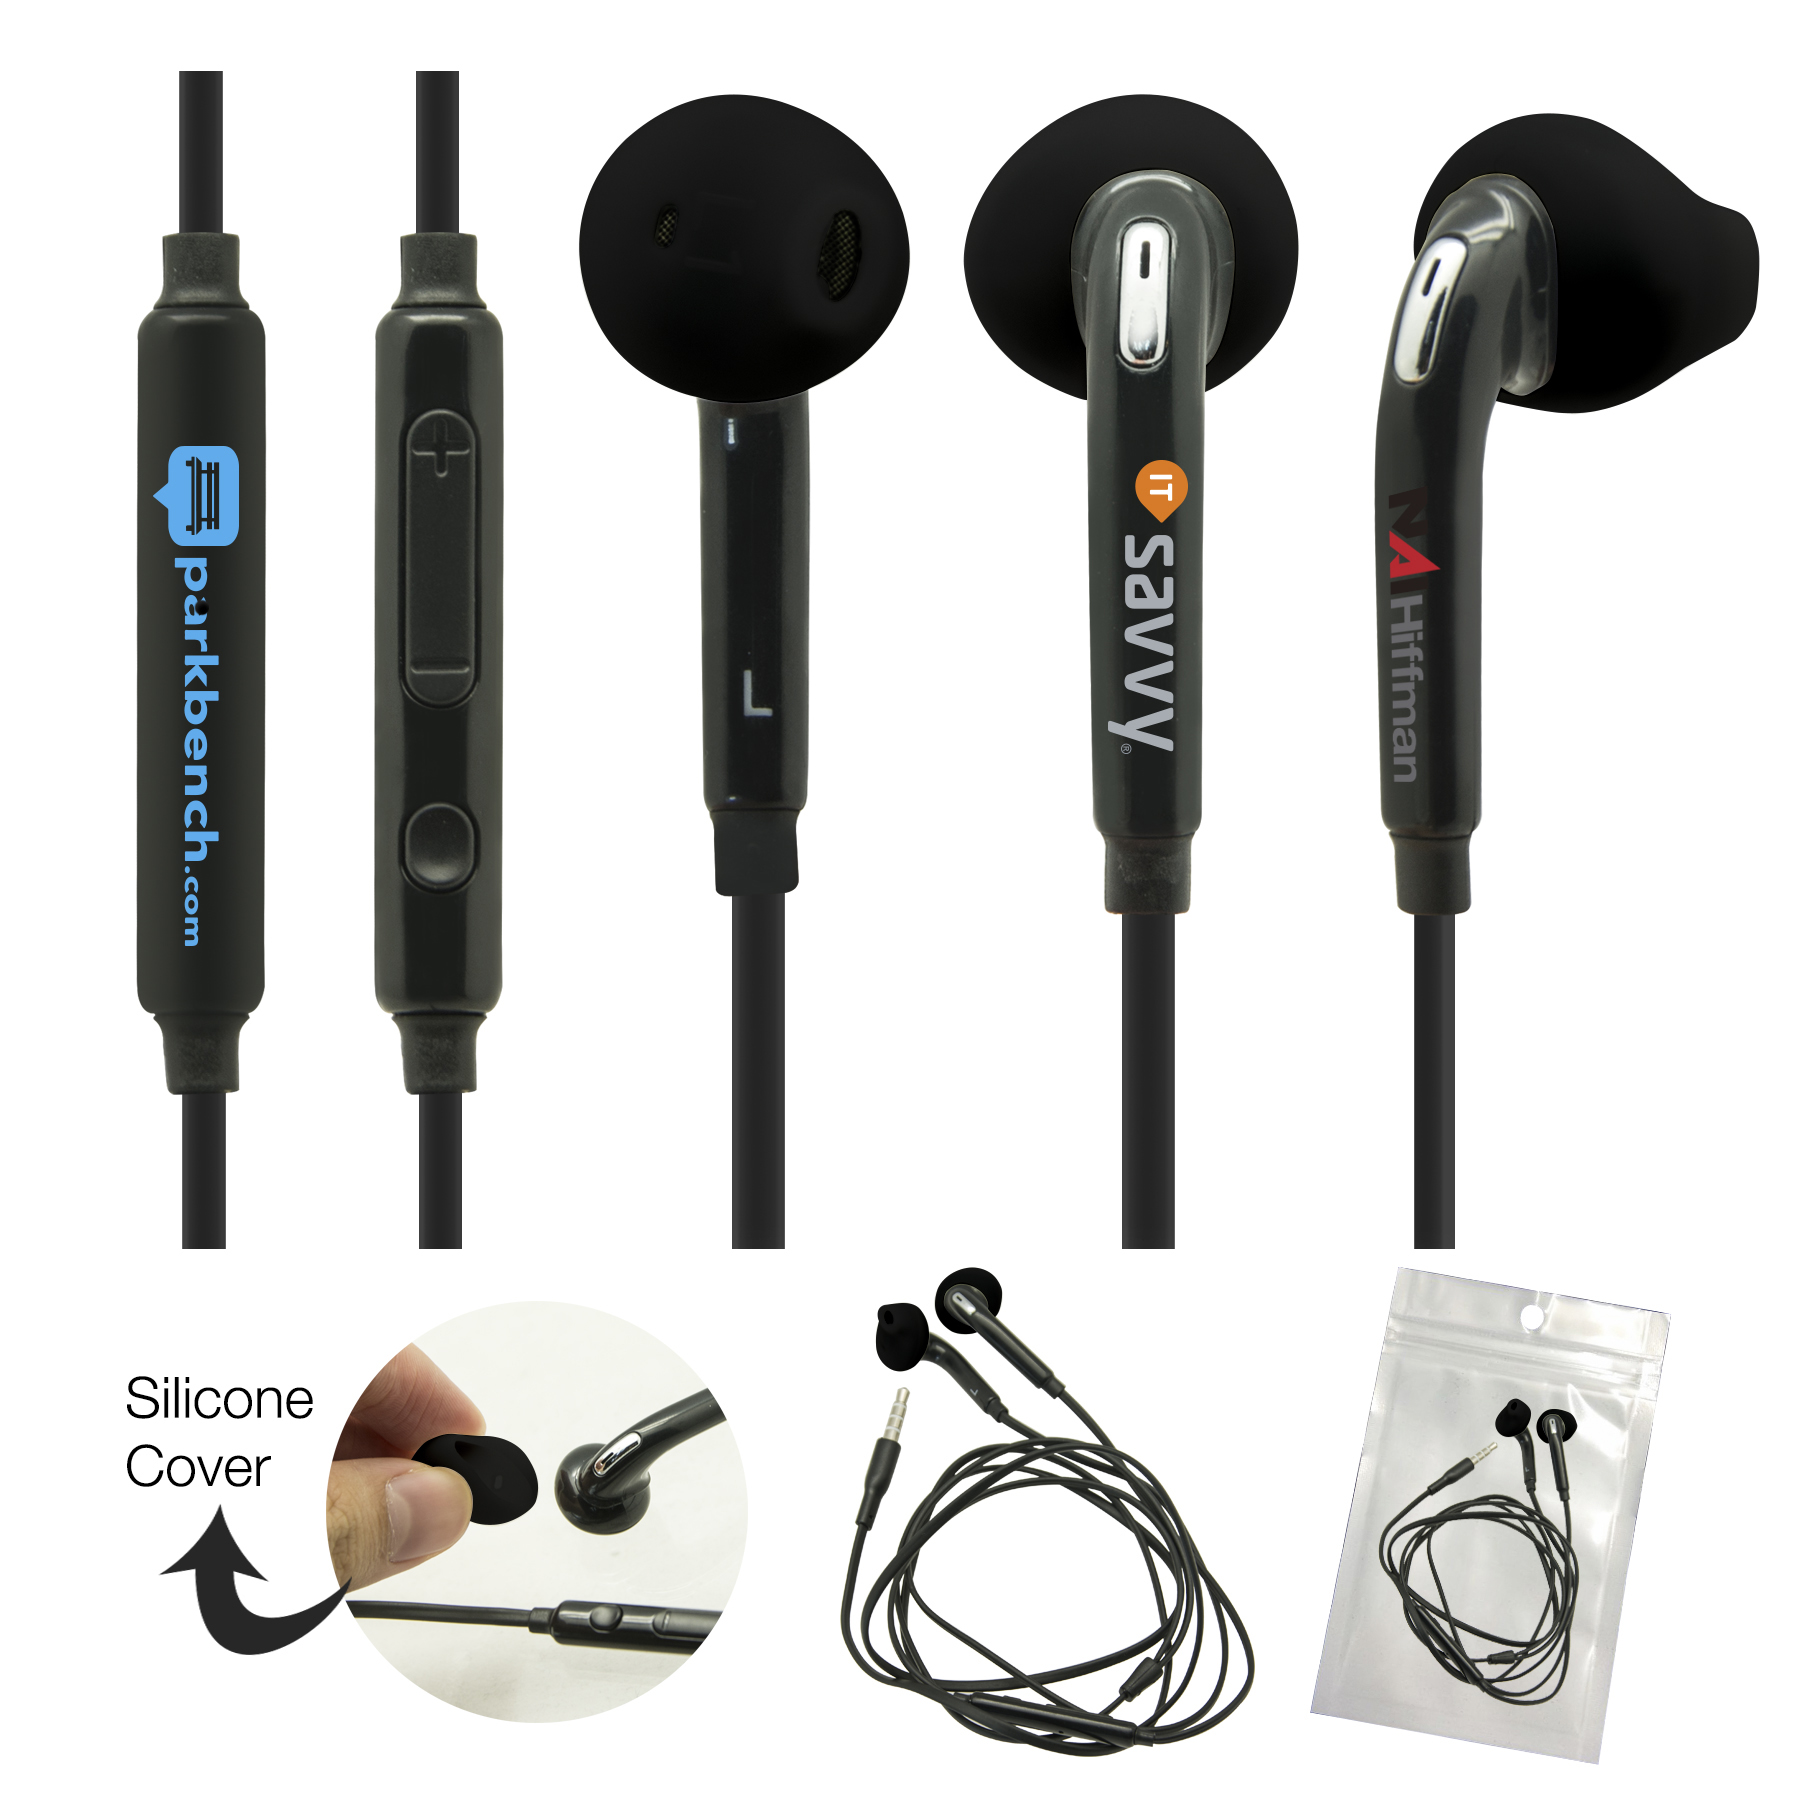 The Stardard Symphony Stereo Earbuds